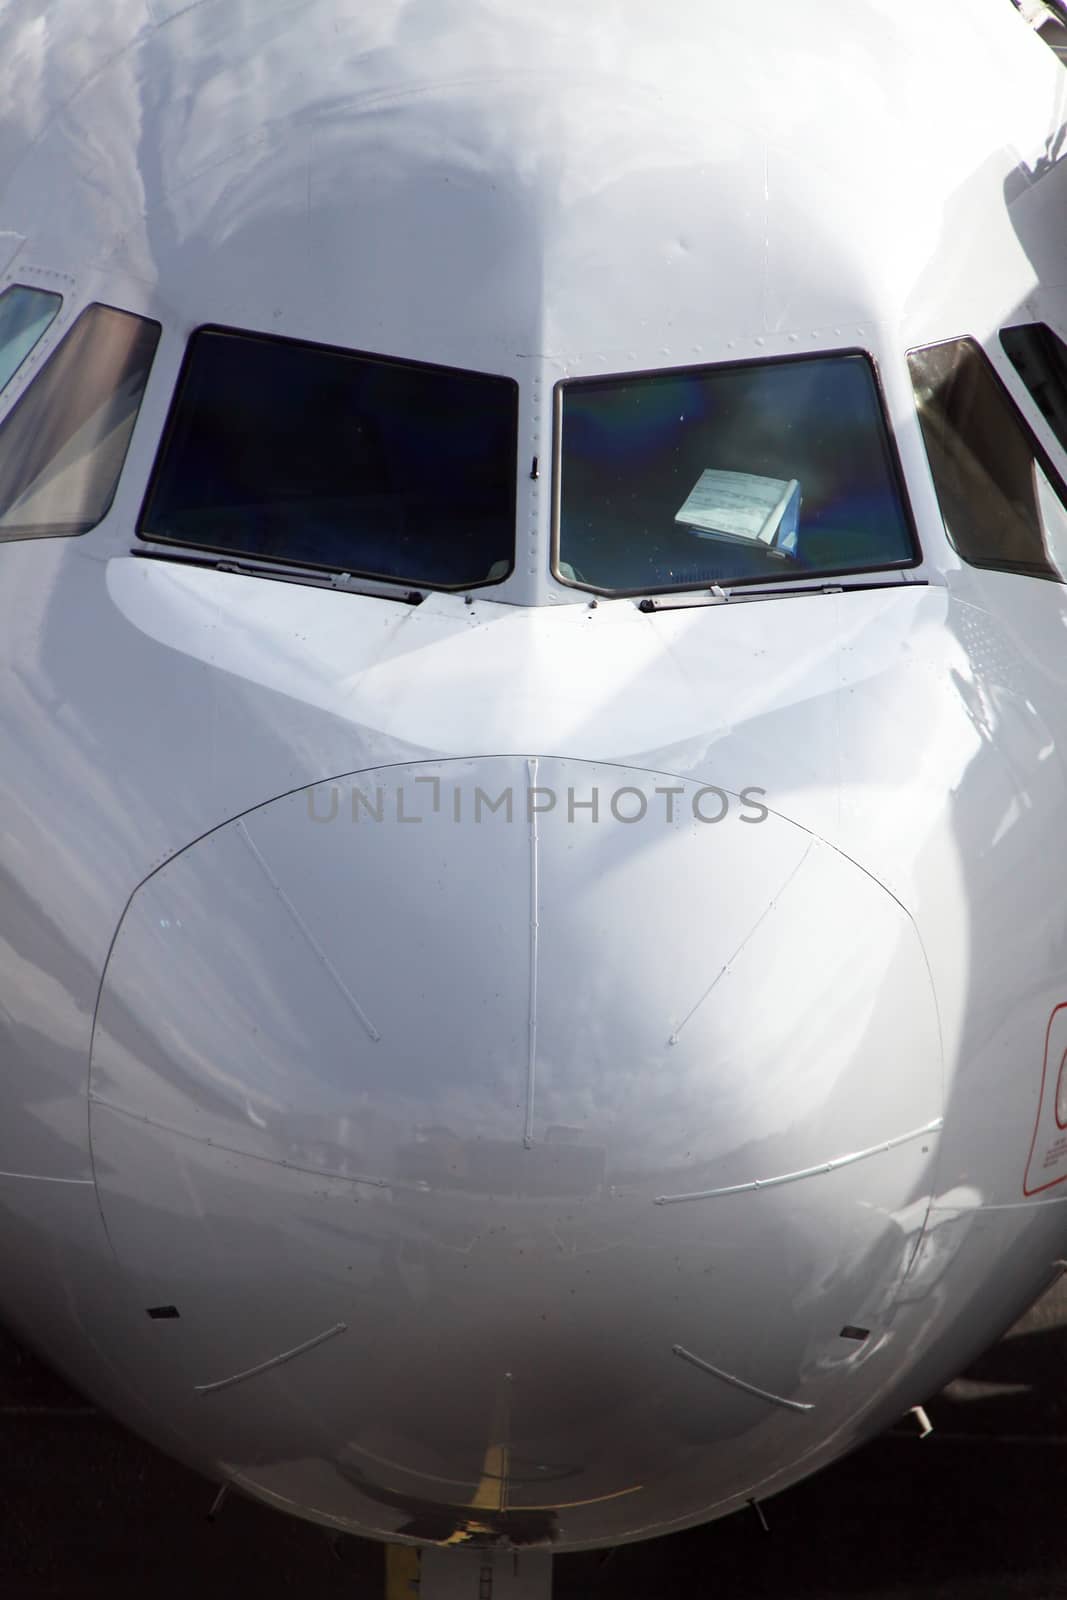 Nose of an commercial airliner